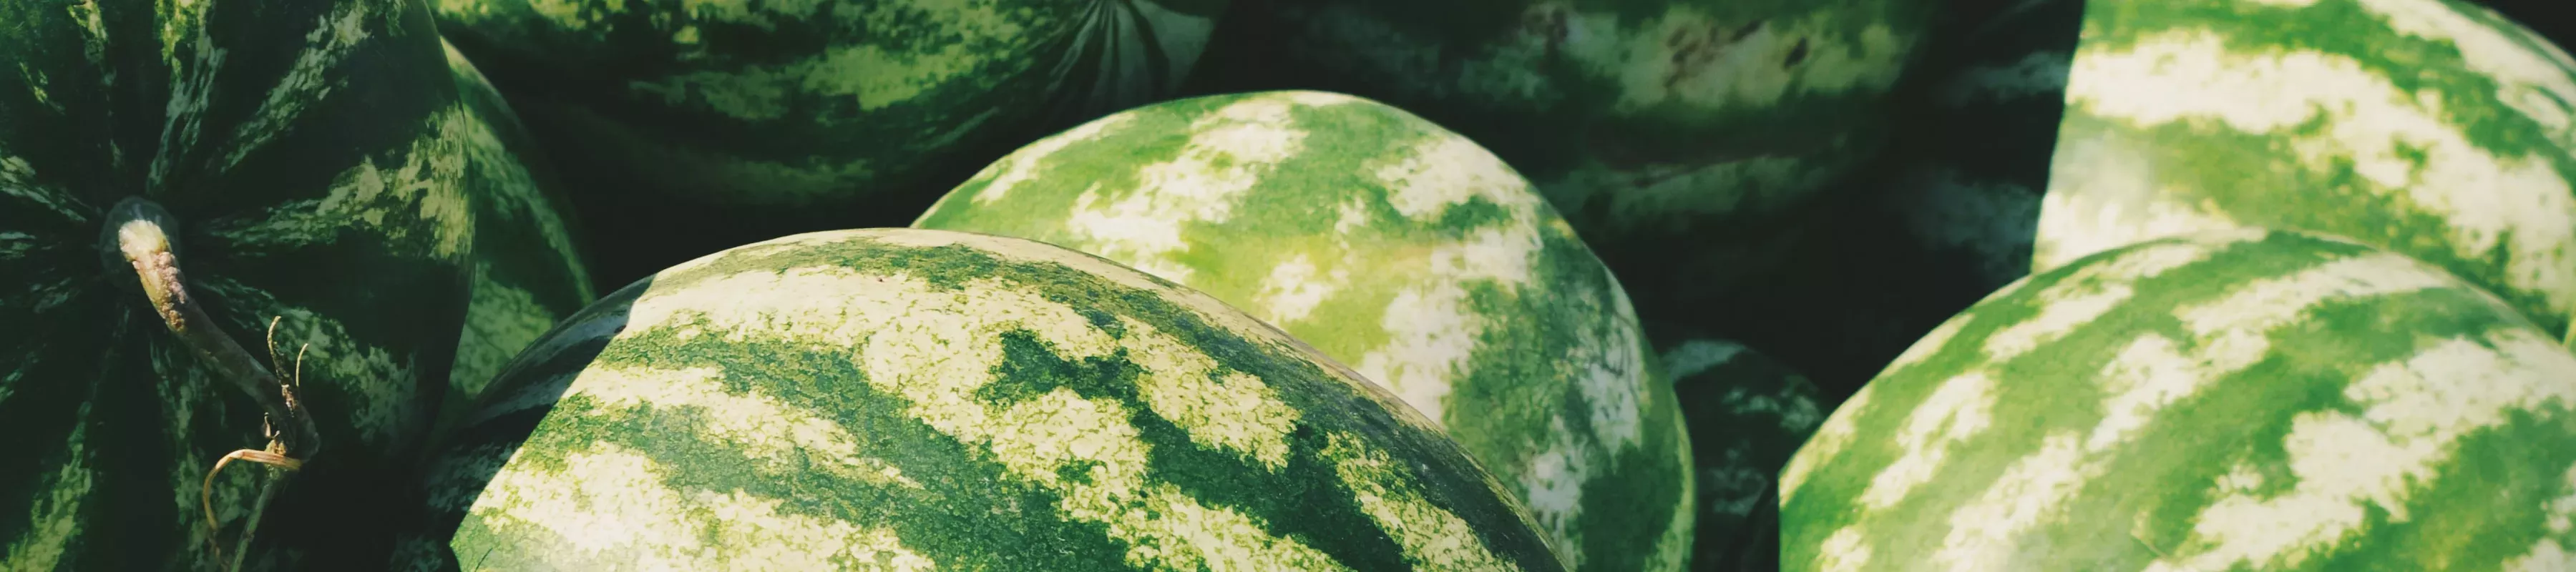 Green watermelons close up